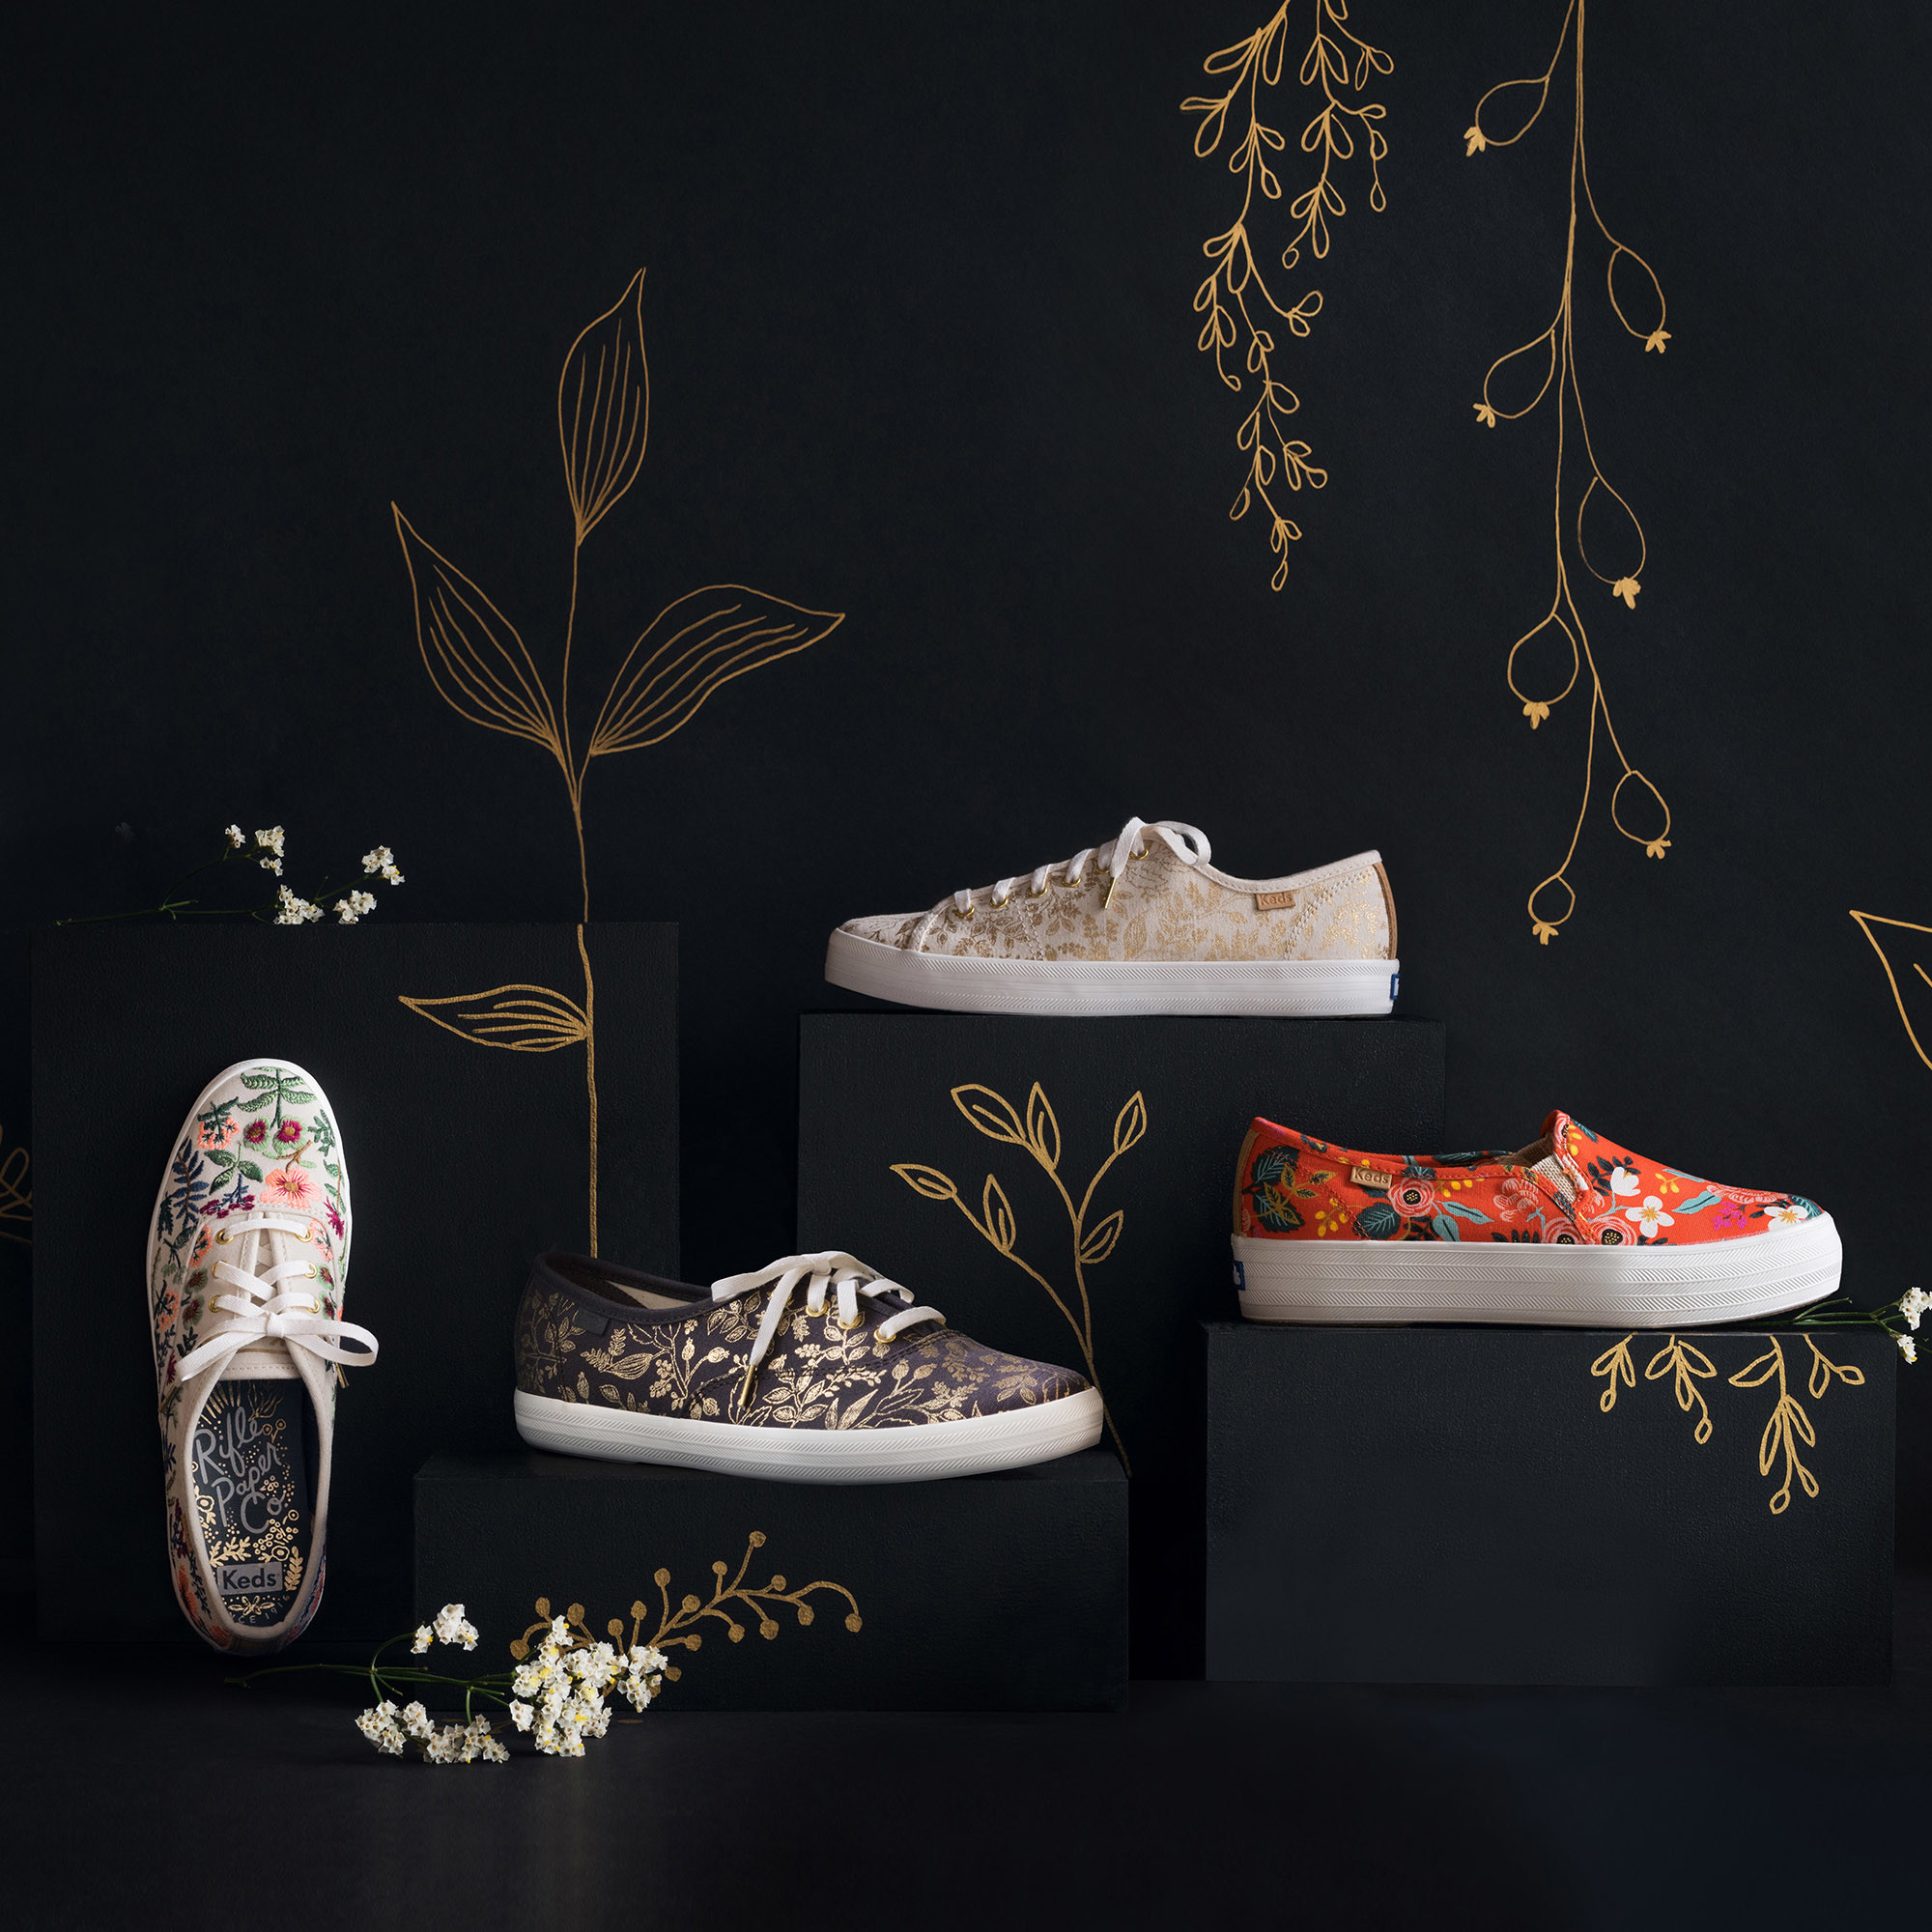 Power to the flower: Keds & Rifle Paper Co. release a new sneaker collection!